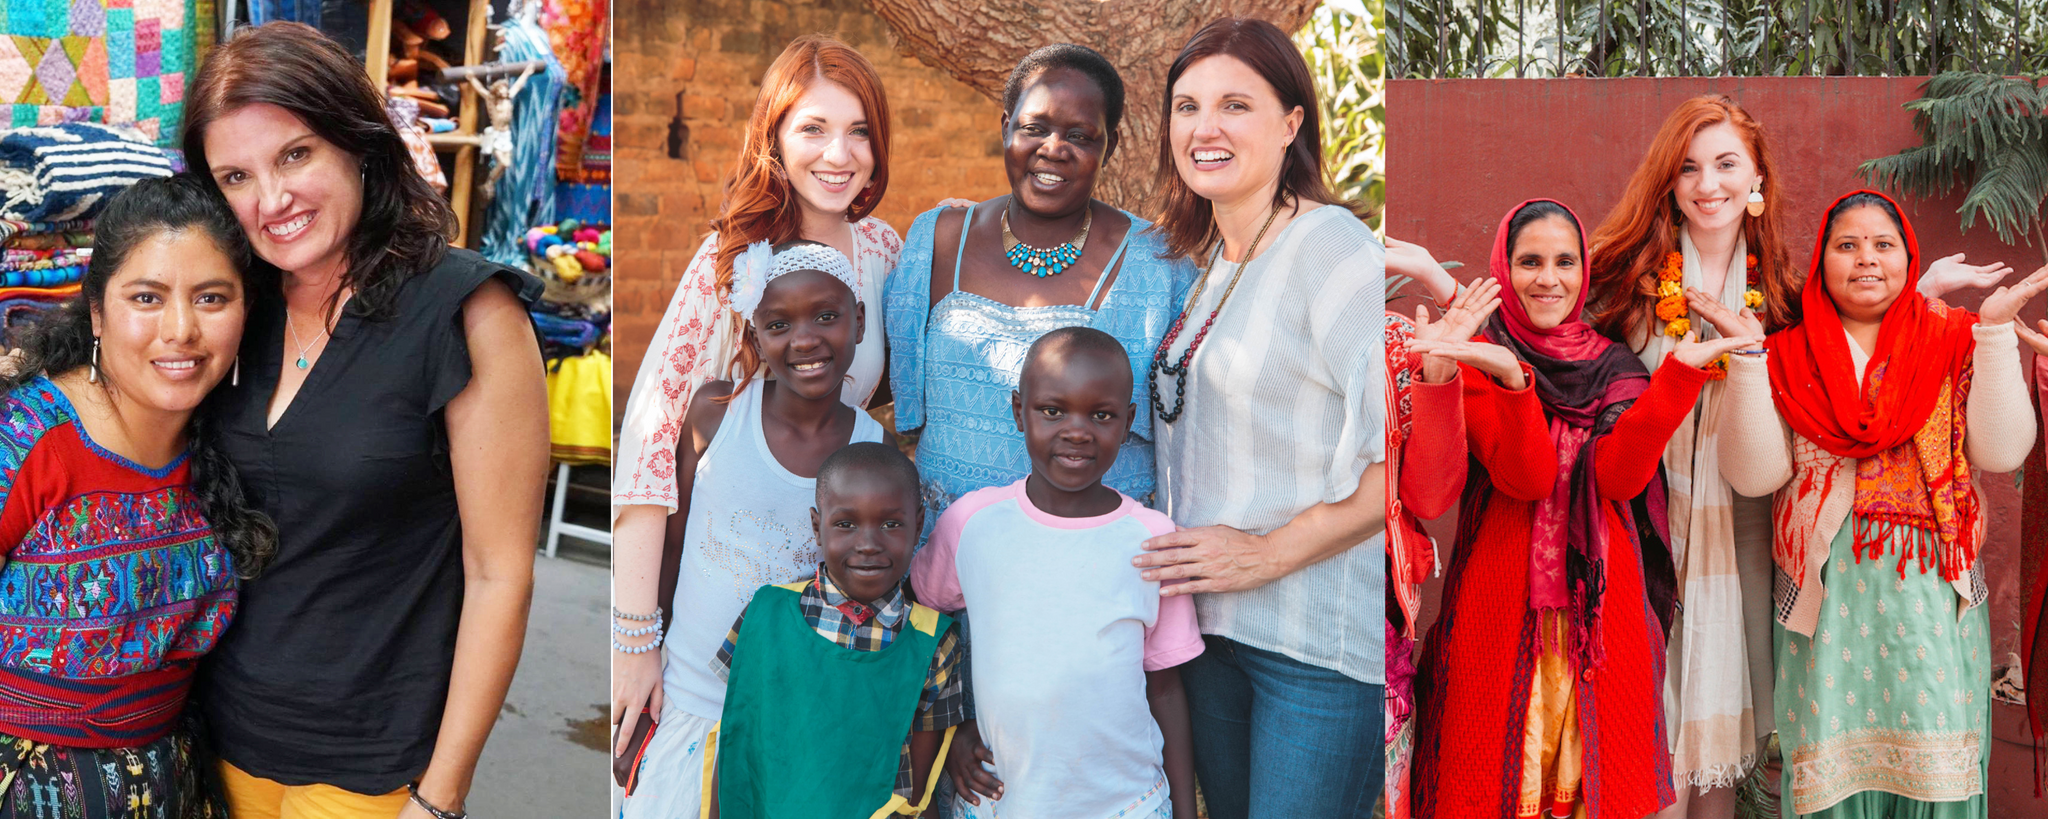 about trades of hope founders gretchen and elisabeth with artisan partners around the world